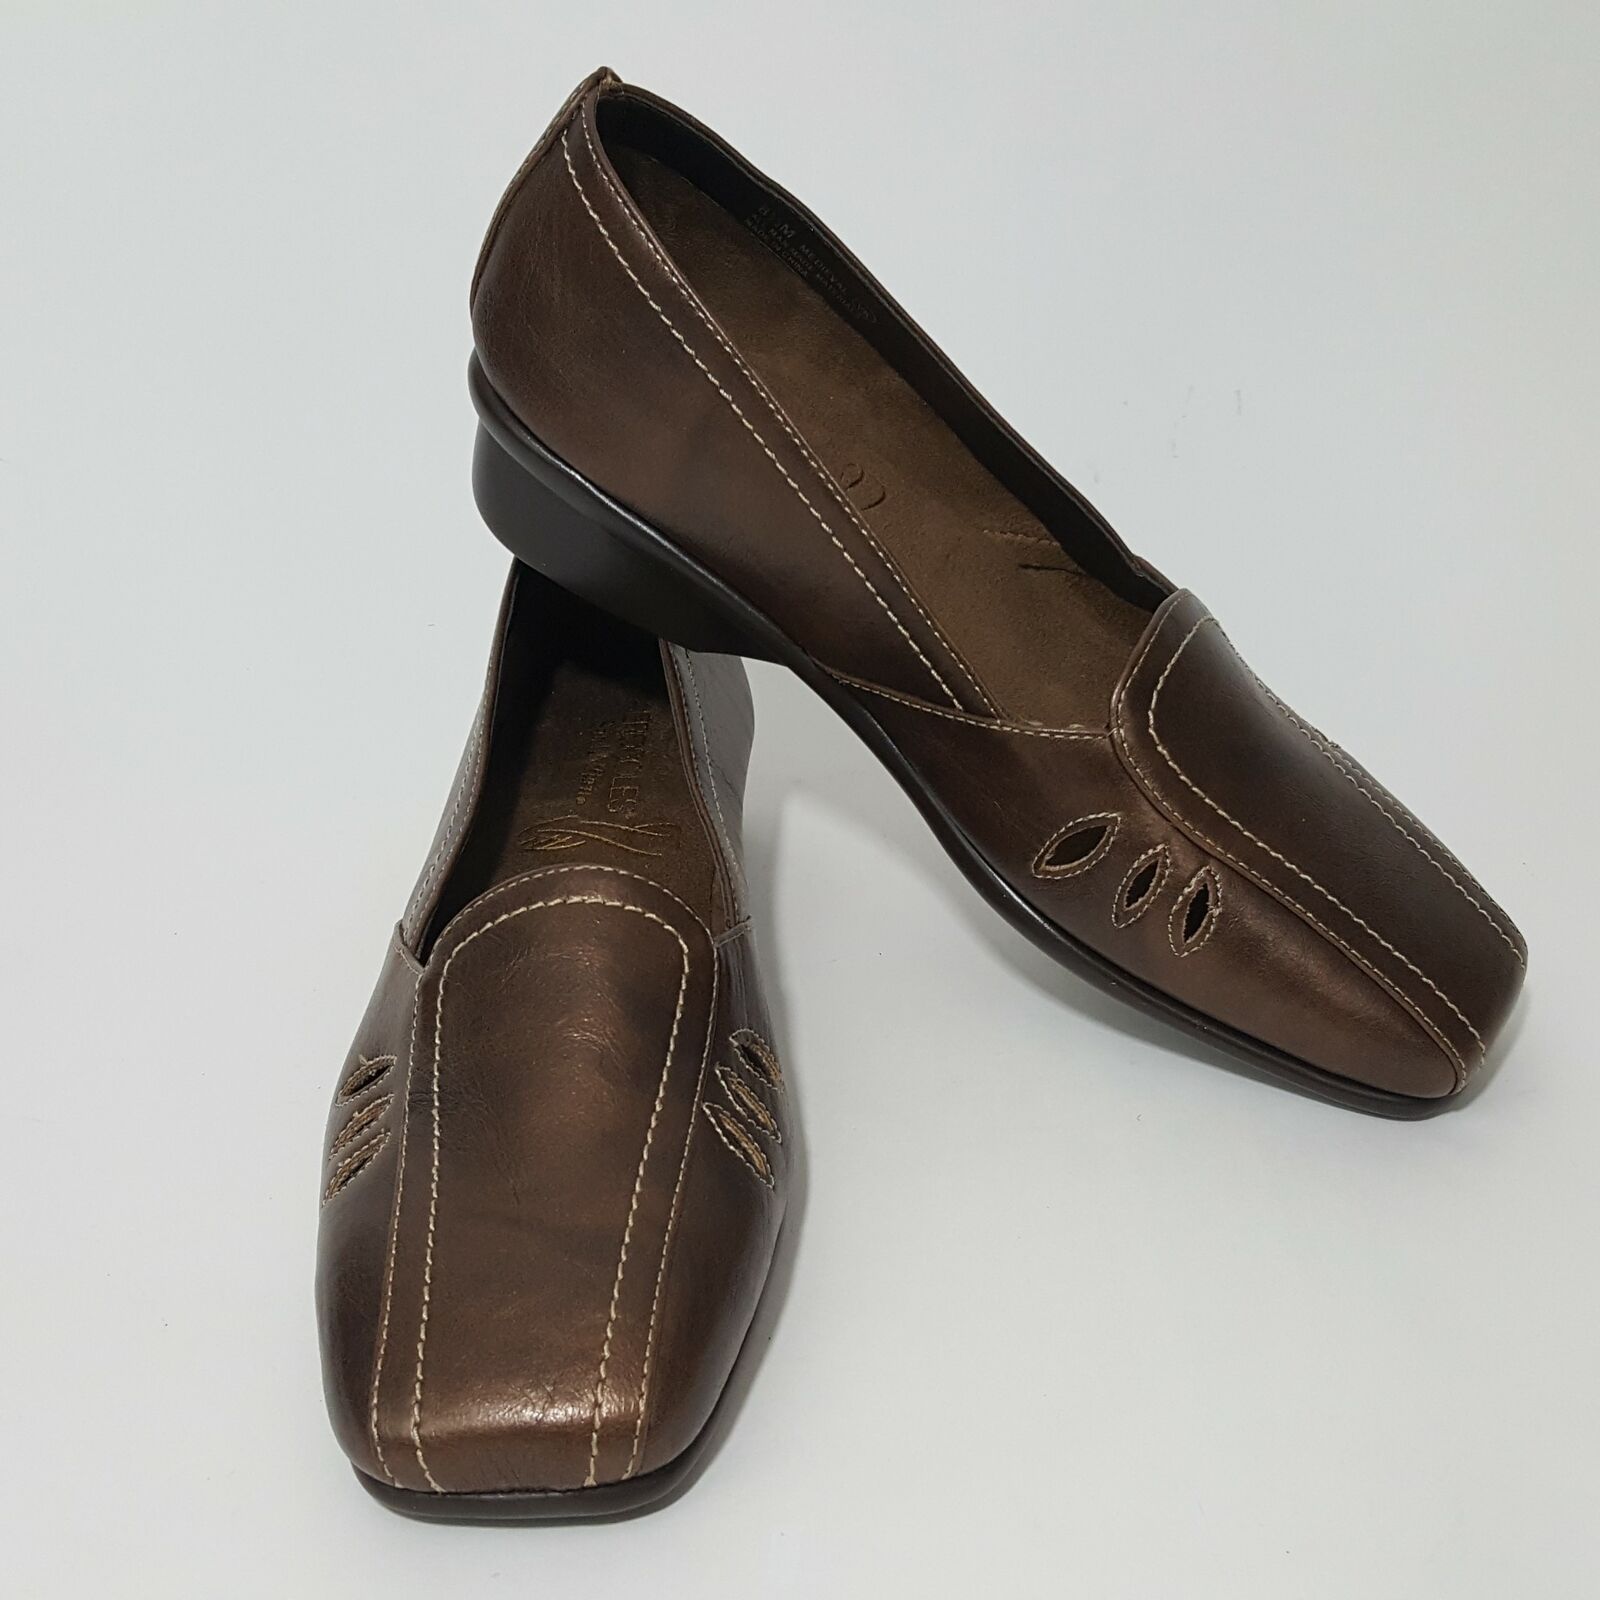 Aerosoles Medieval Slip On Dress Bronze Loafers Flats Womens 8.5 M Shoes